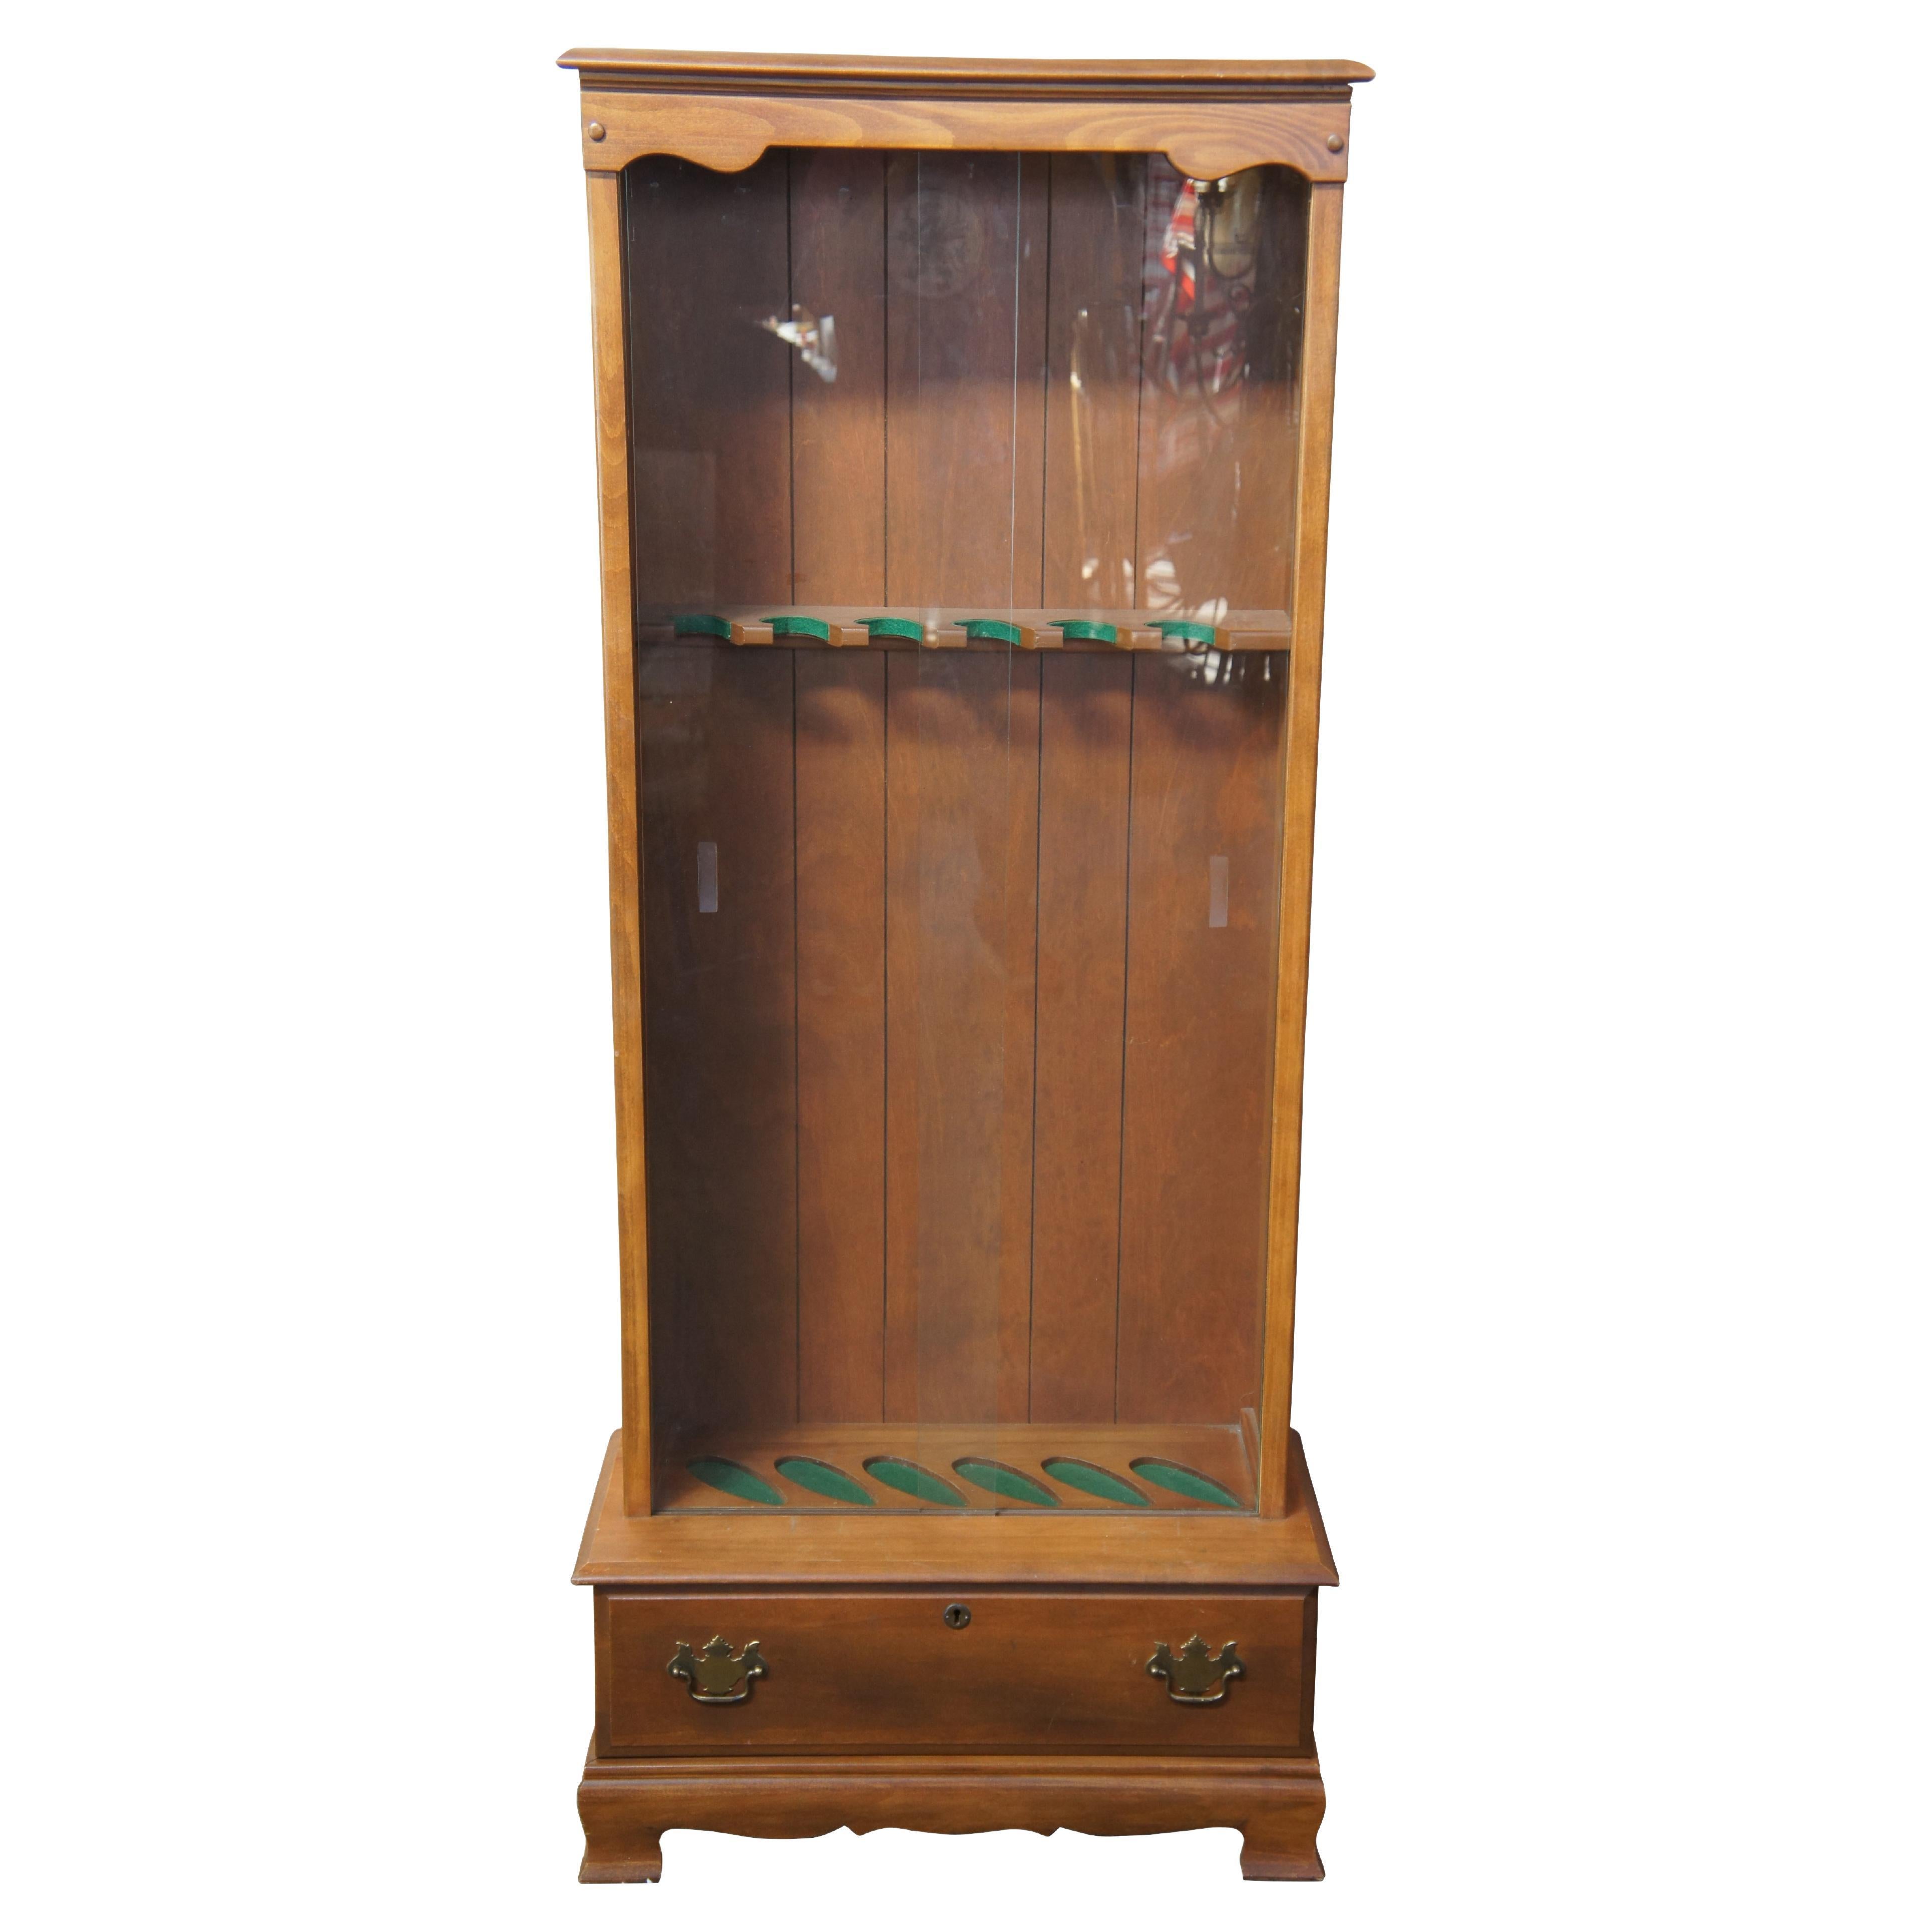 Vintage Early American Country Style Maple Glass Front Gun Rifle Display Cabinet